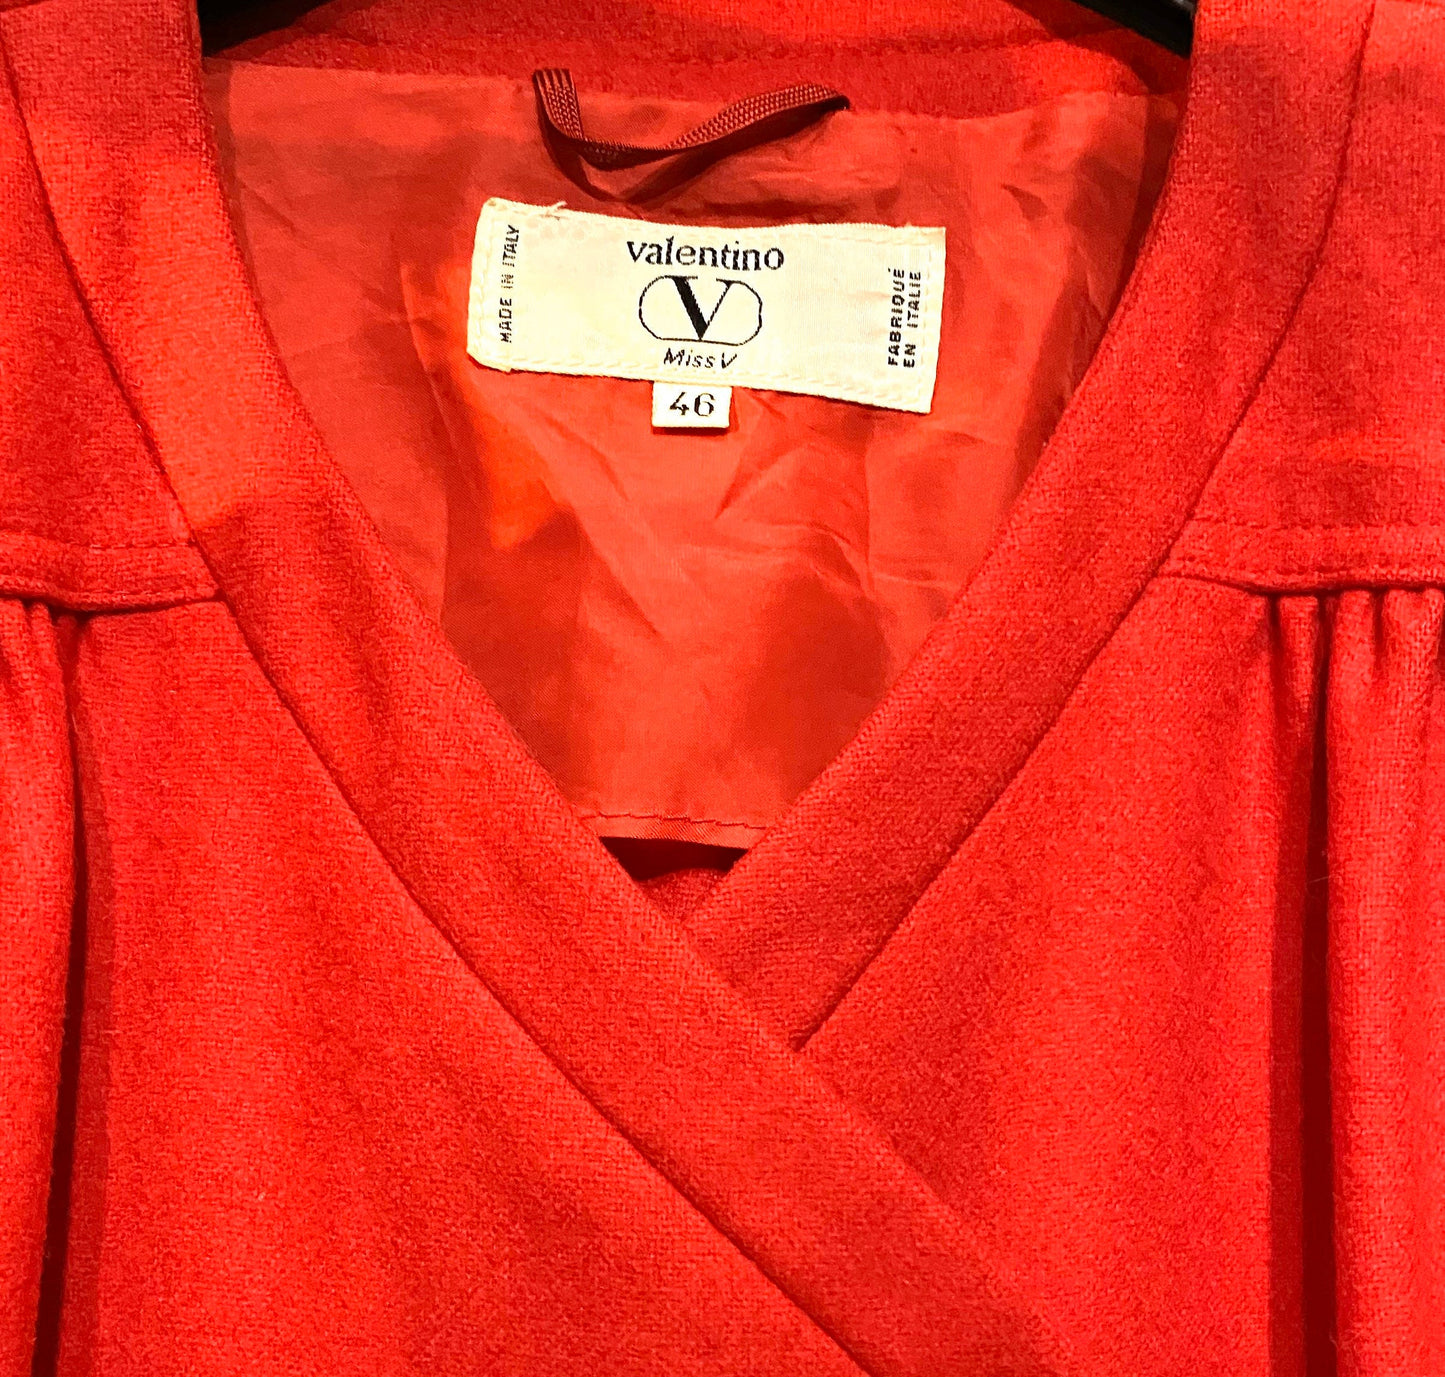 Miss V by Valentino red double breast ladies coat, 1980s Italy mint condition